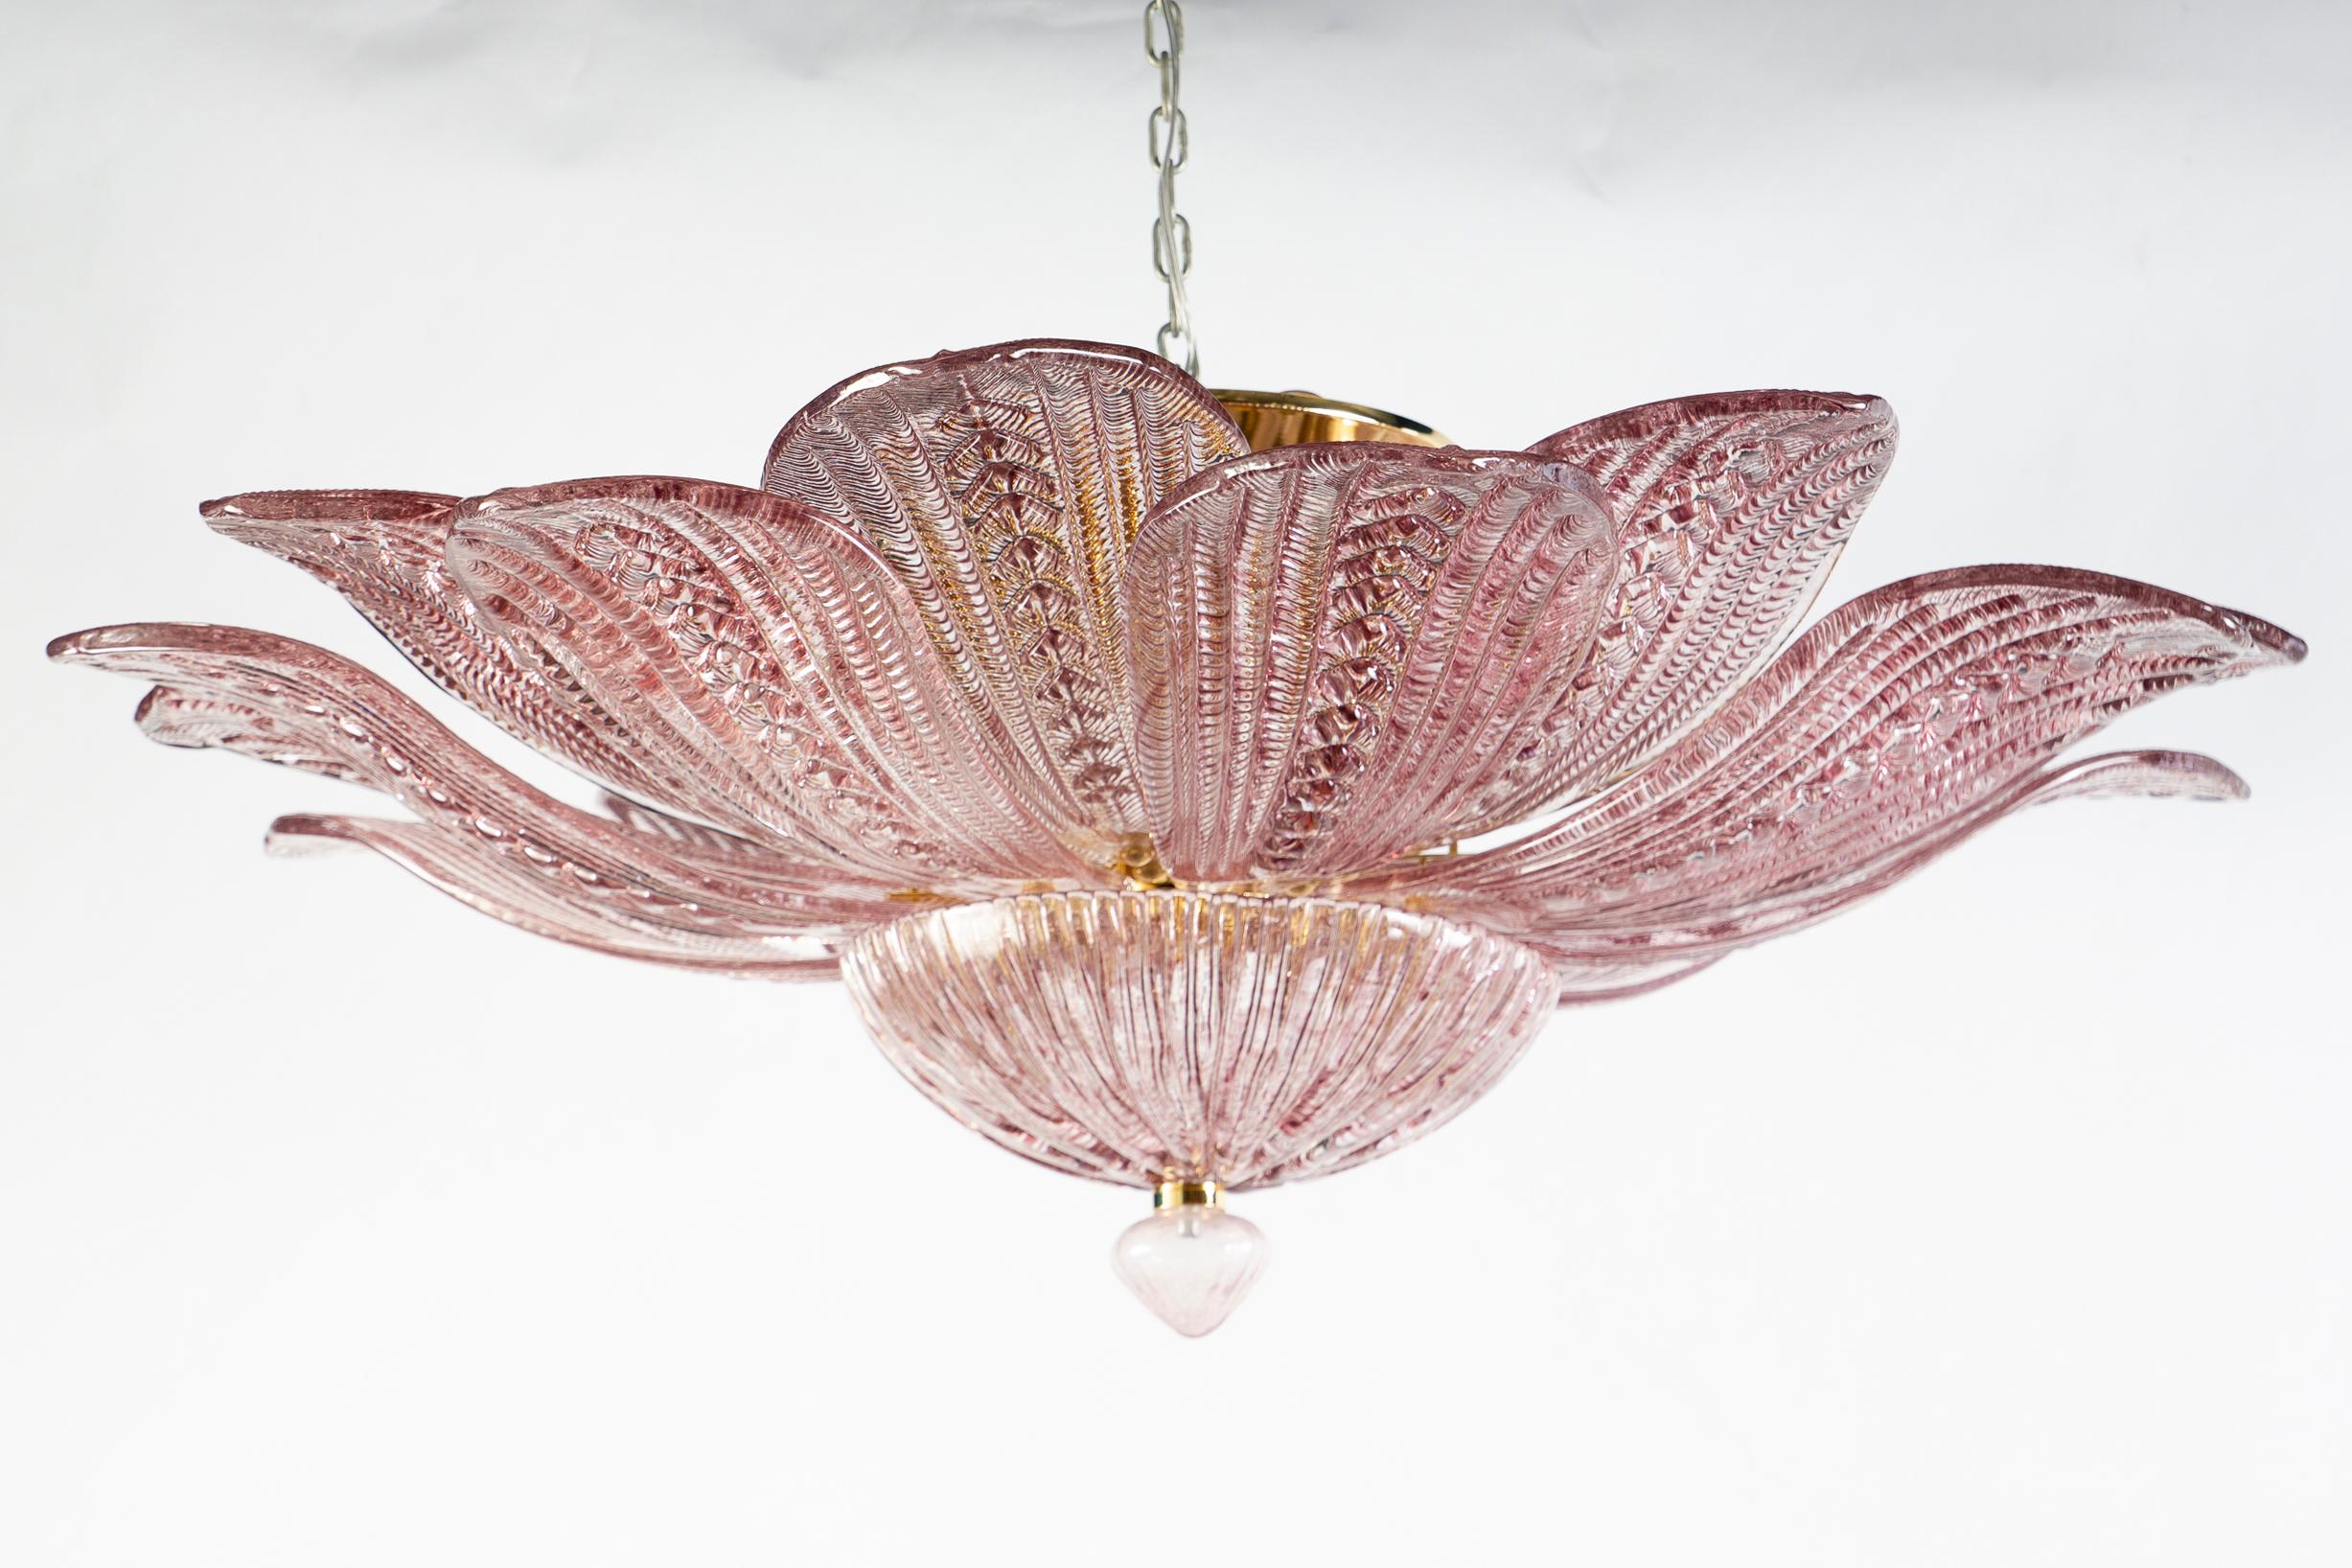 Charming Pink Amethyst Murano Glass Leave Ceiling Light or Chandelier In Excellent Condition For Sale In Rome, IT